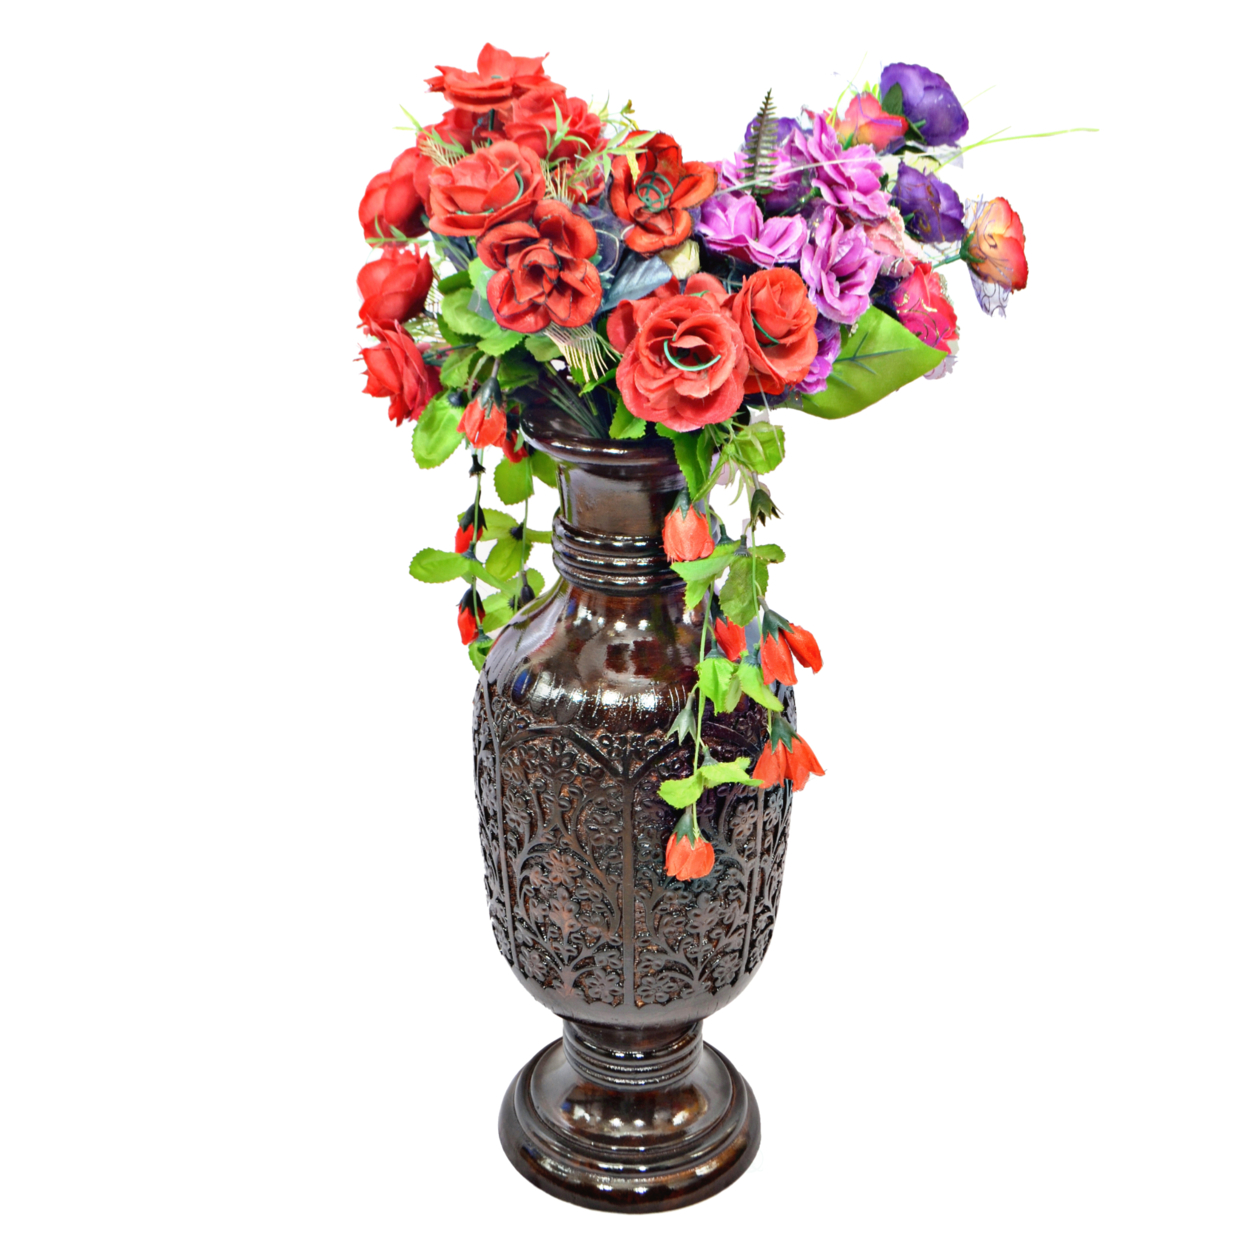 Antique Decorative Hand Curved Brown Mango Wood Table Flower Vase With Unique Textured Pattern, 24 Inch